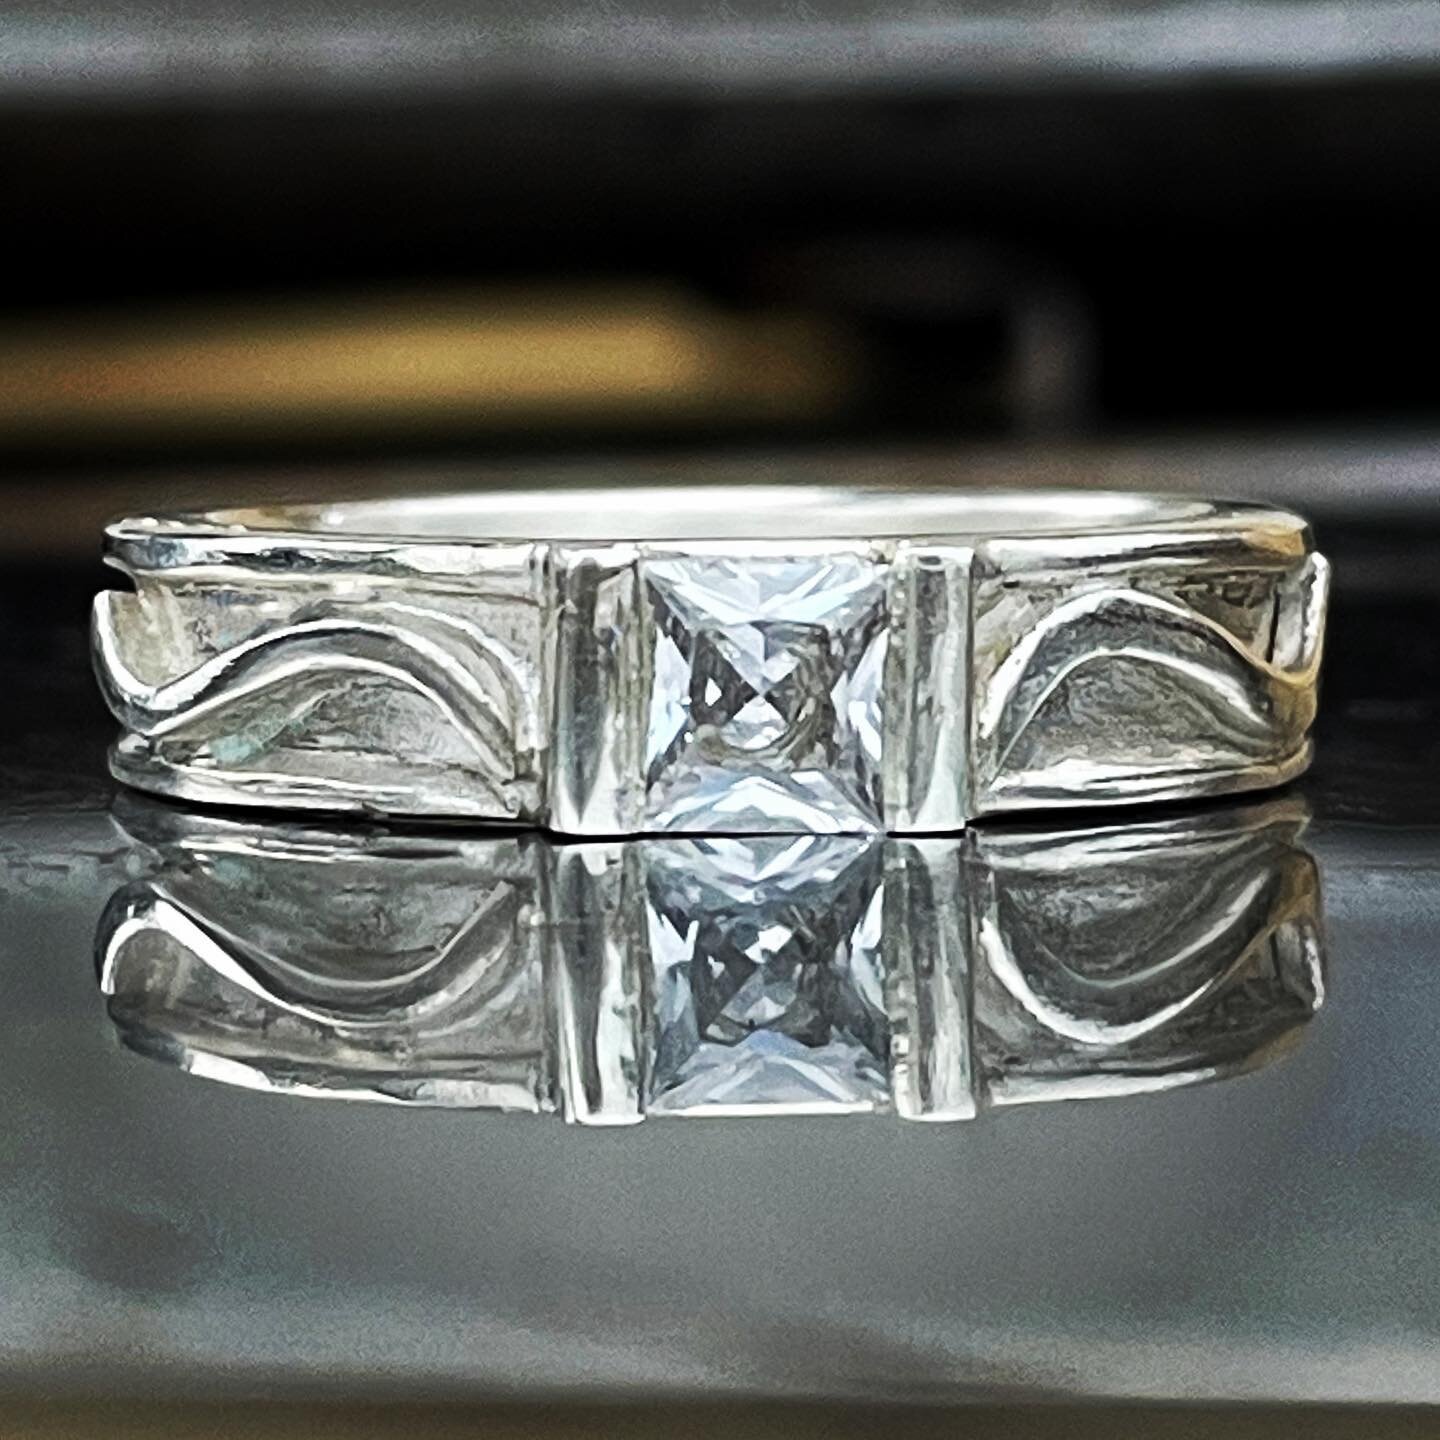 This argentium gents ring with princess cut stone was a lot of fun to make.  The reflection from the steel barbecue doubles the effect!! I&rsquo;m cheered to imagine how many glorious Rotto summers have been celebrated here, despite the wild weather 